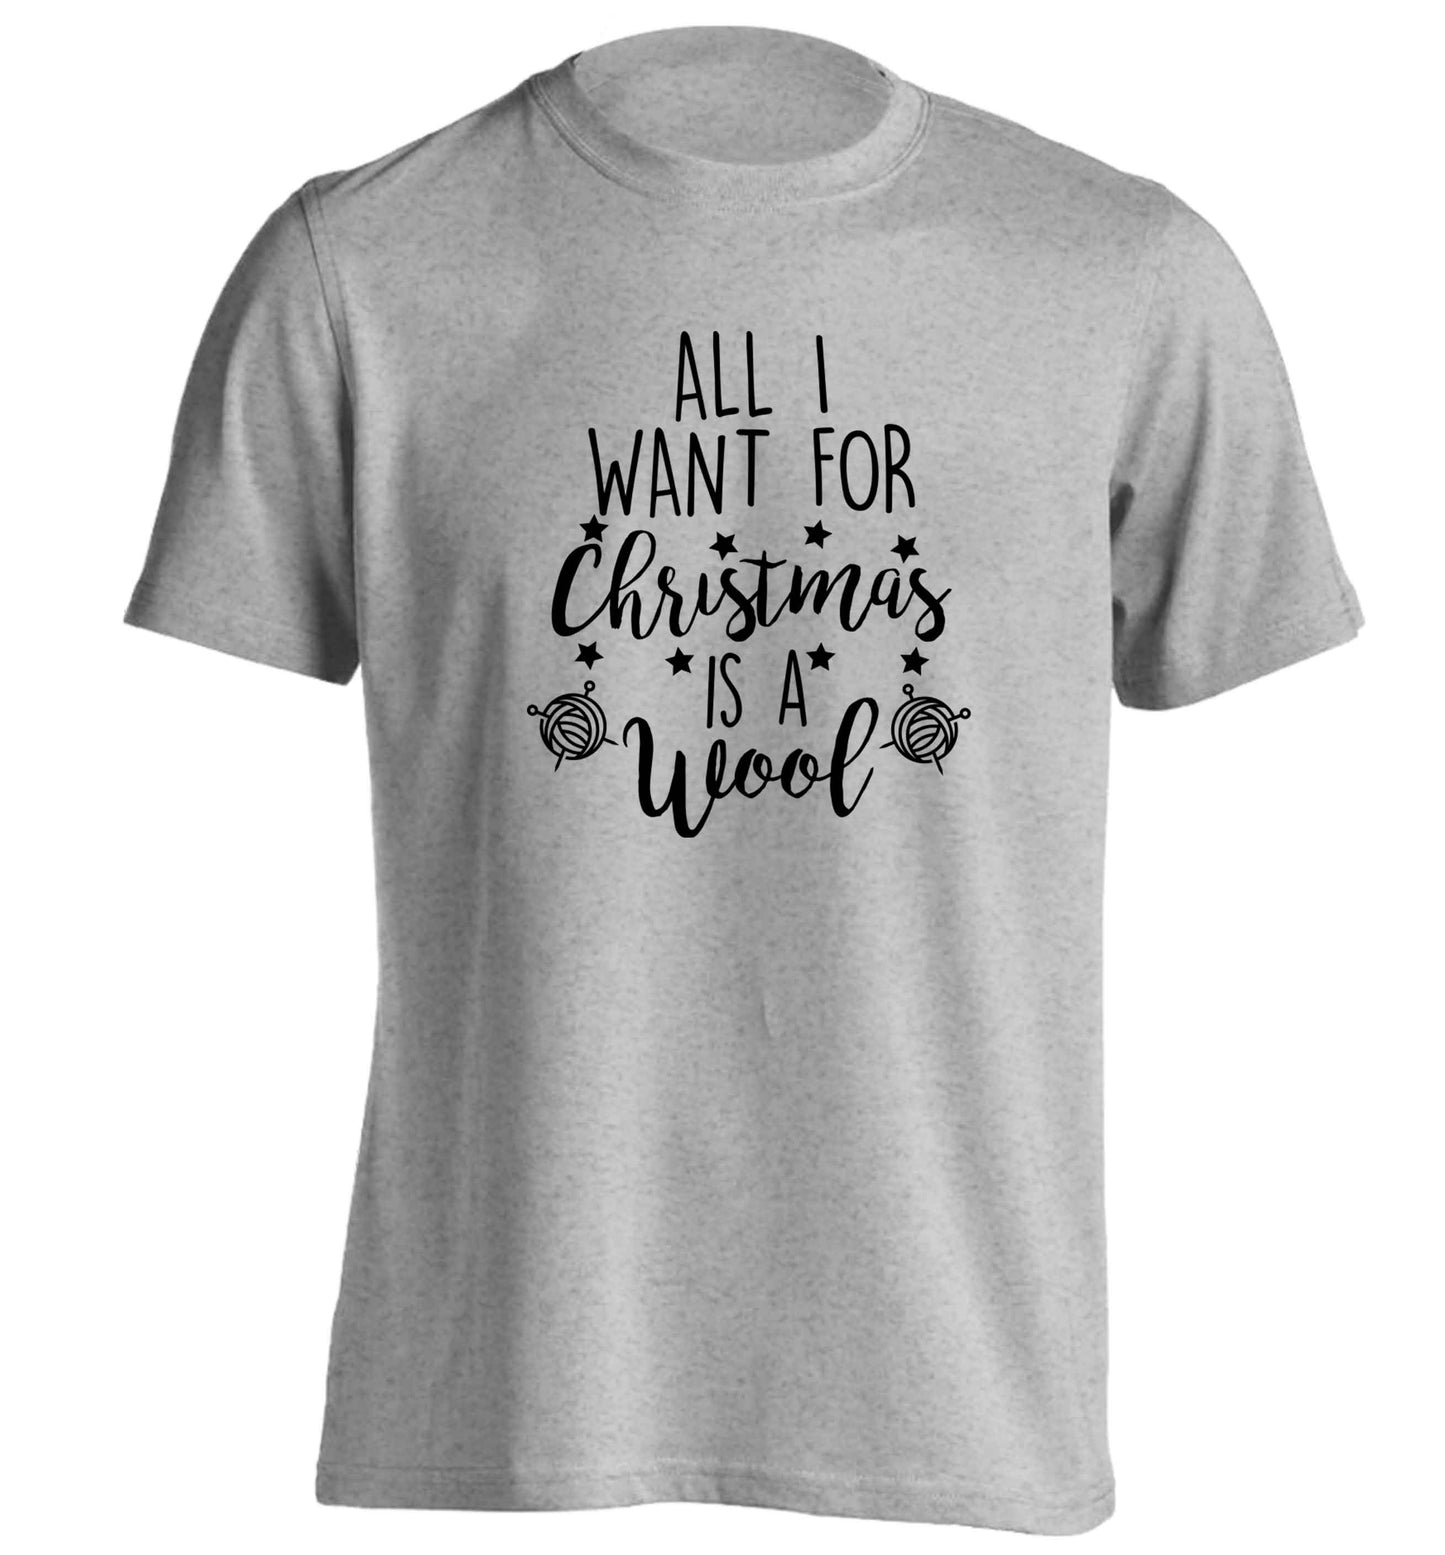 All I want for Christmas is wool! adults unisex grey Tshirt 2XL